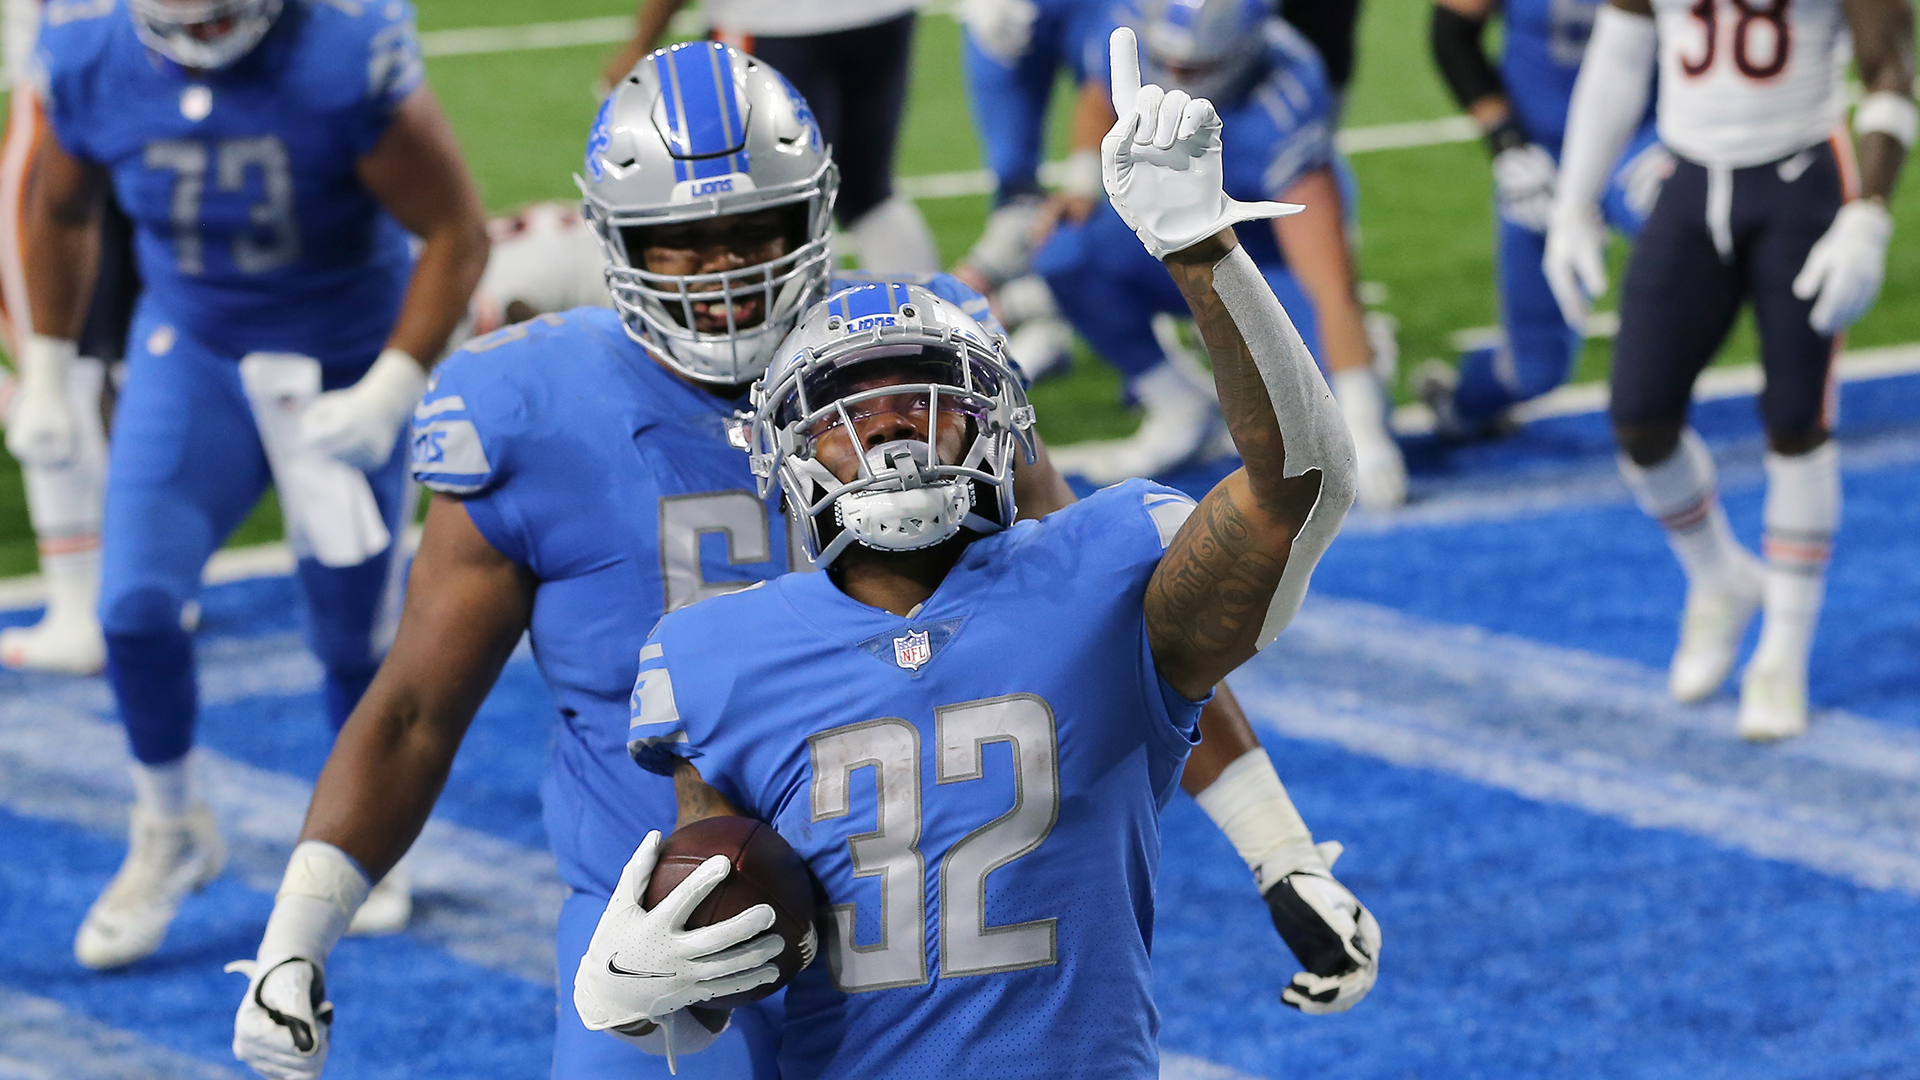 Lions Fans Shocked As D'Andre Swift Drops Game Winning Touchdown Vs. Bears